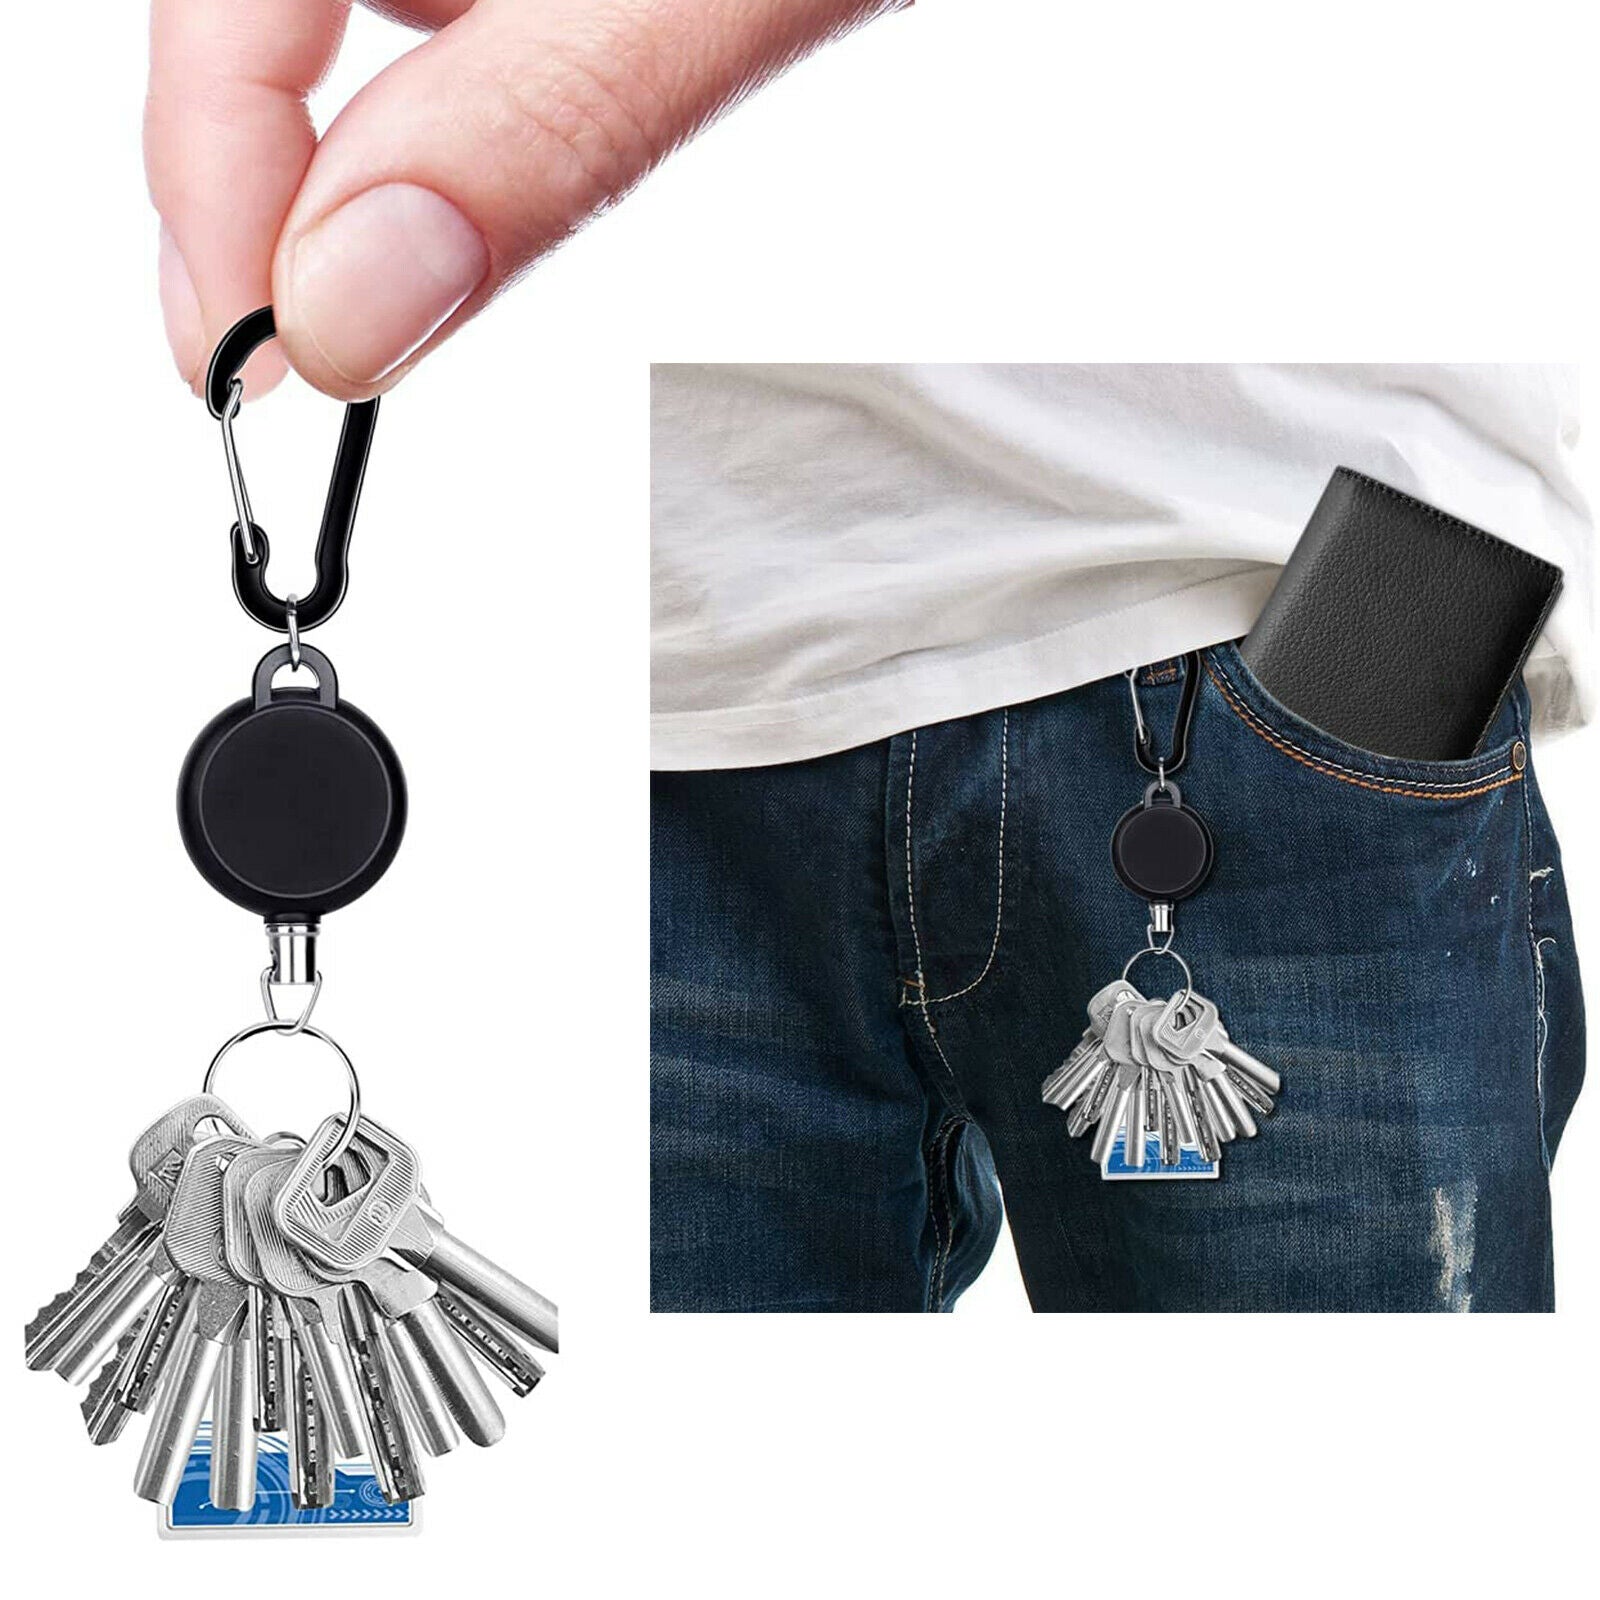 5x Compact Retractable Key Chain Recoil Keychain ID Card Keeper Retainer